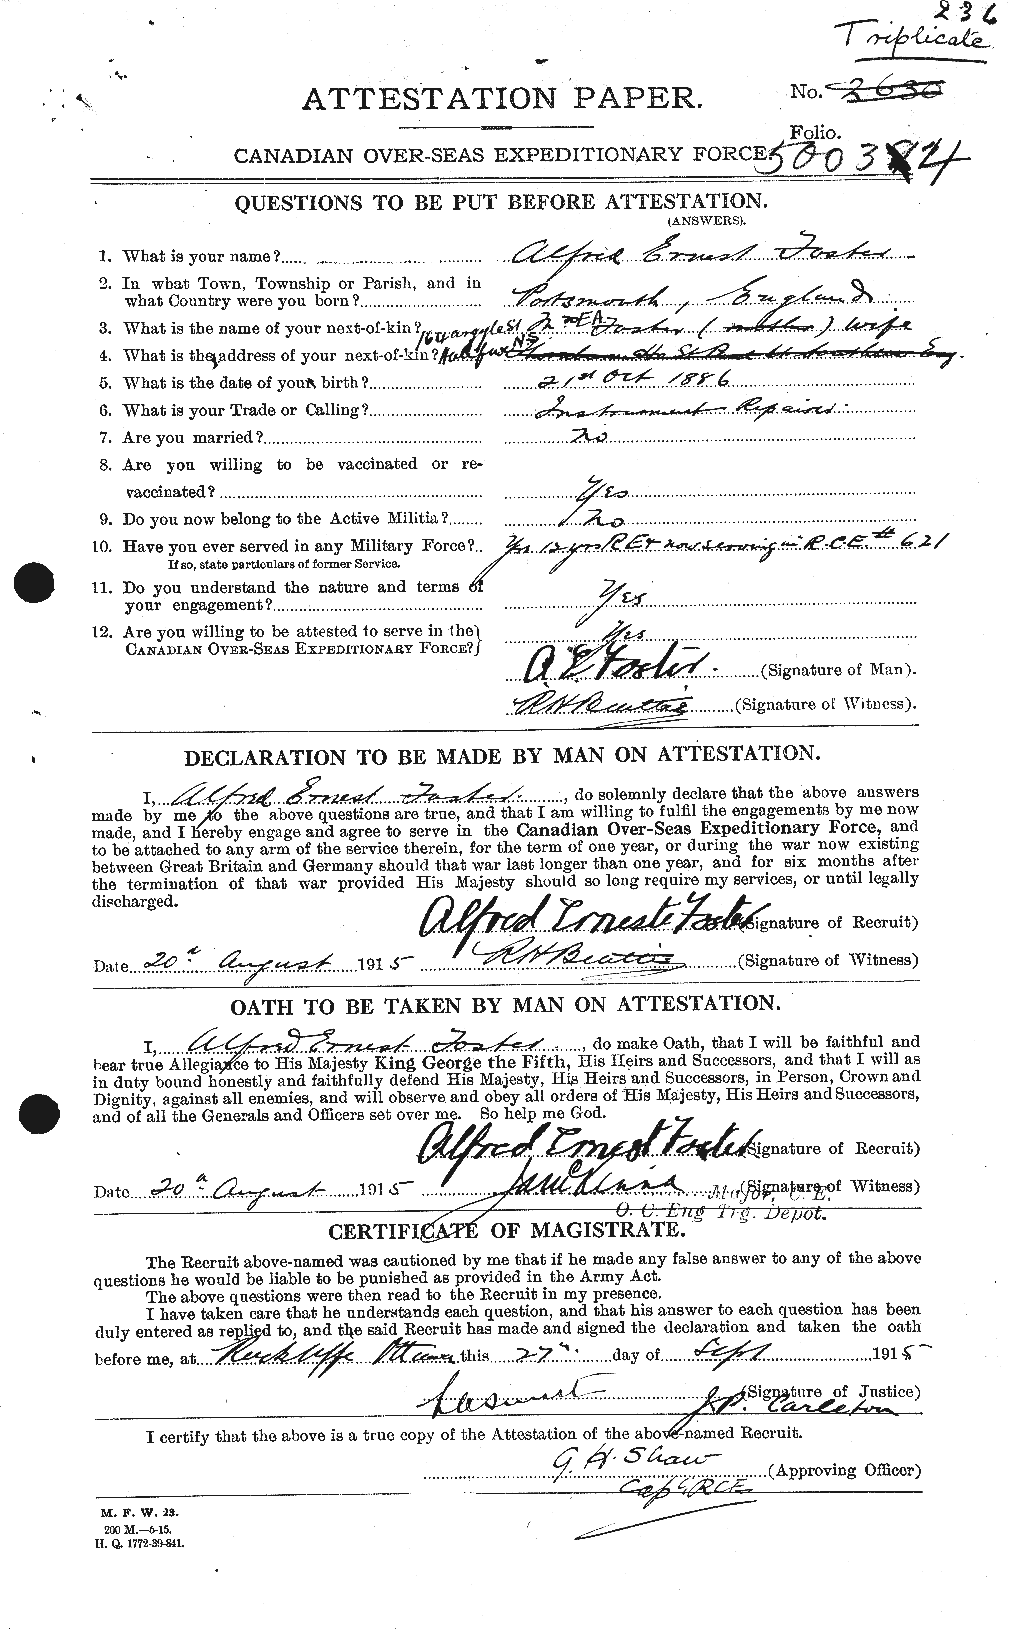 Personnel Records of the First World War - CEF 330447a